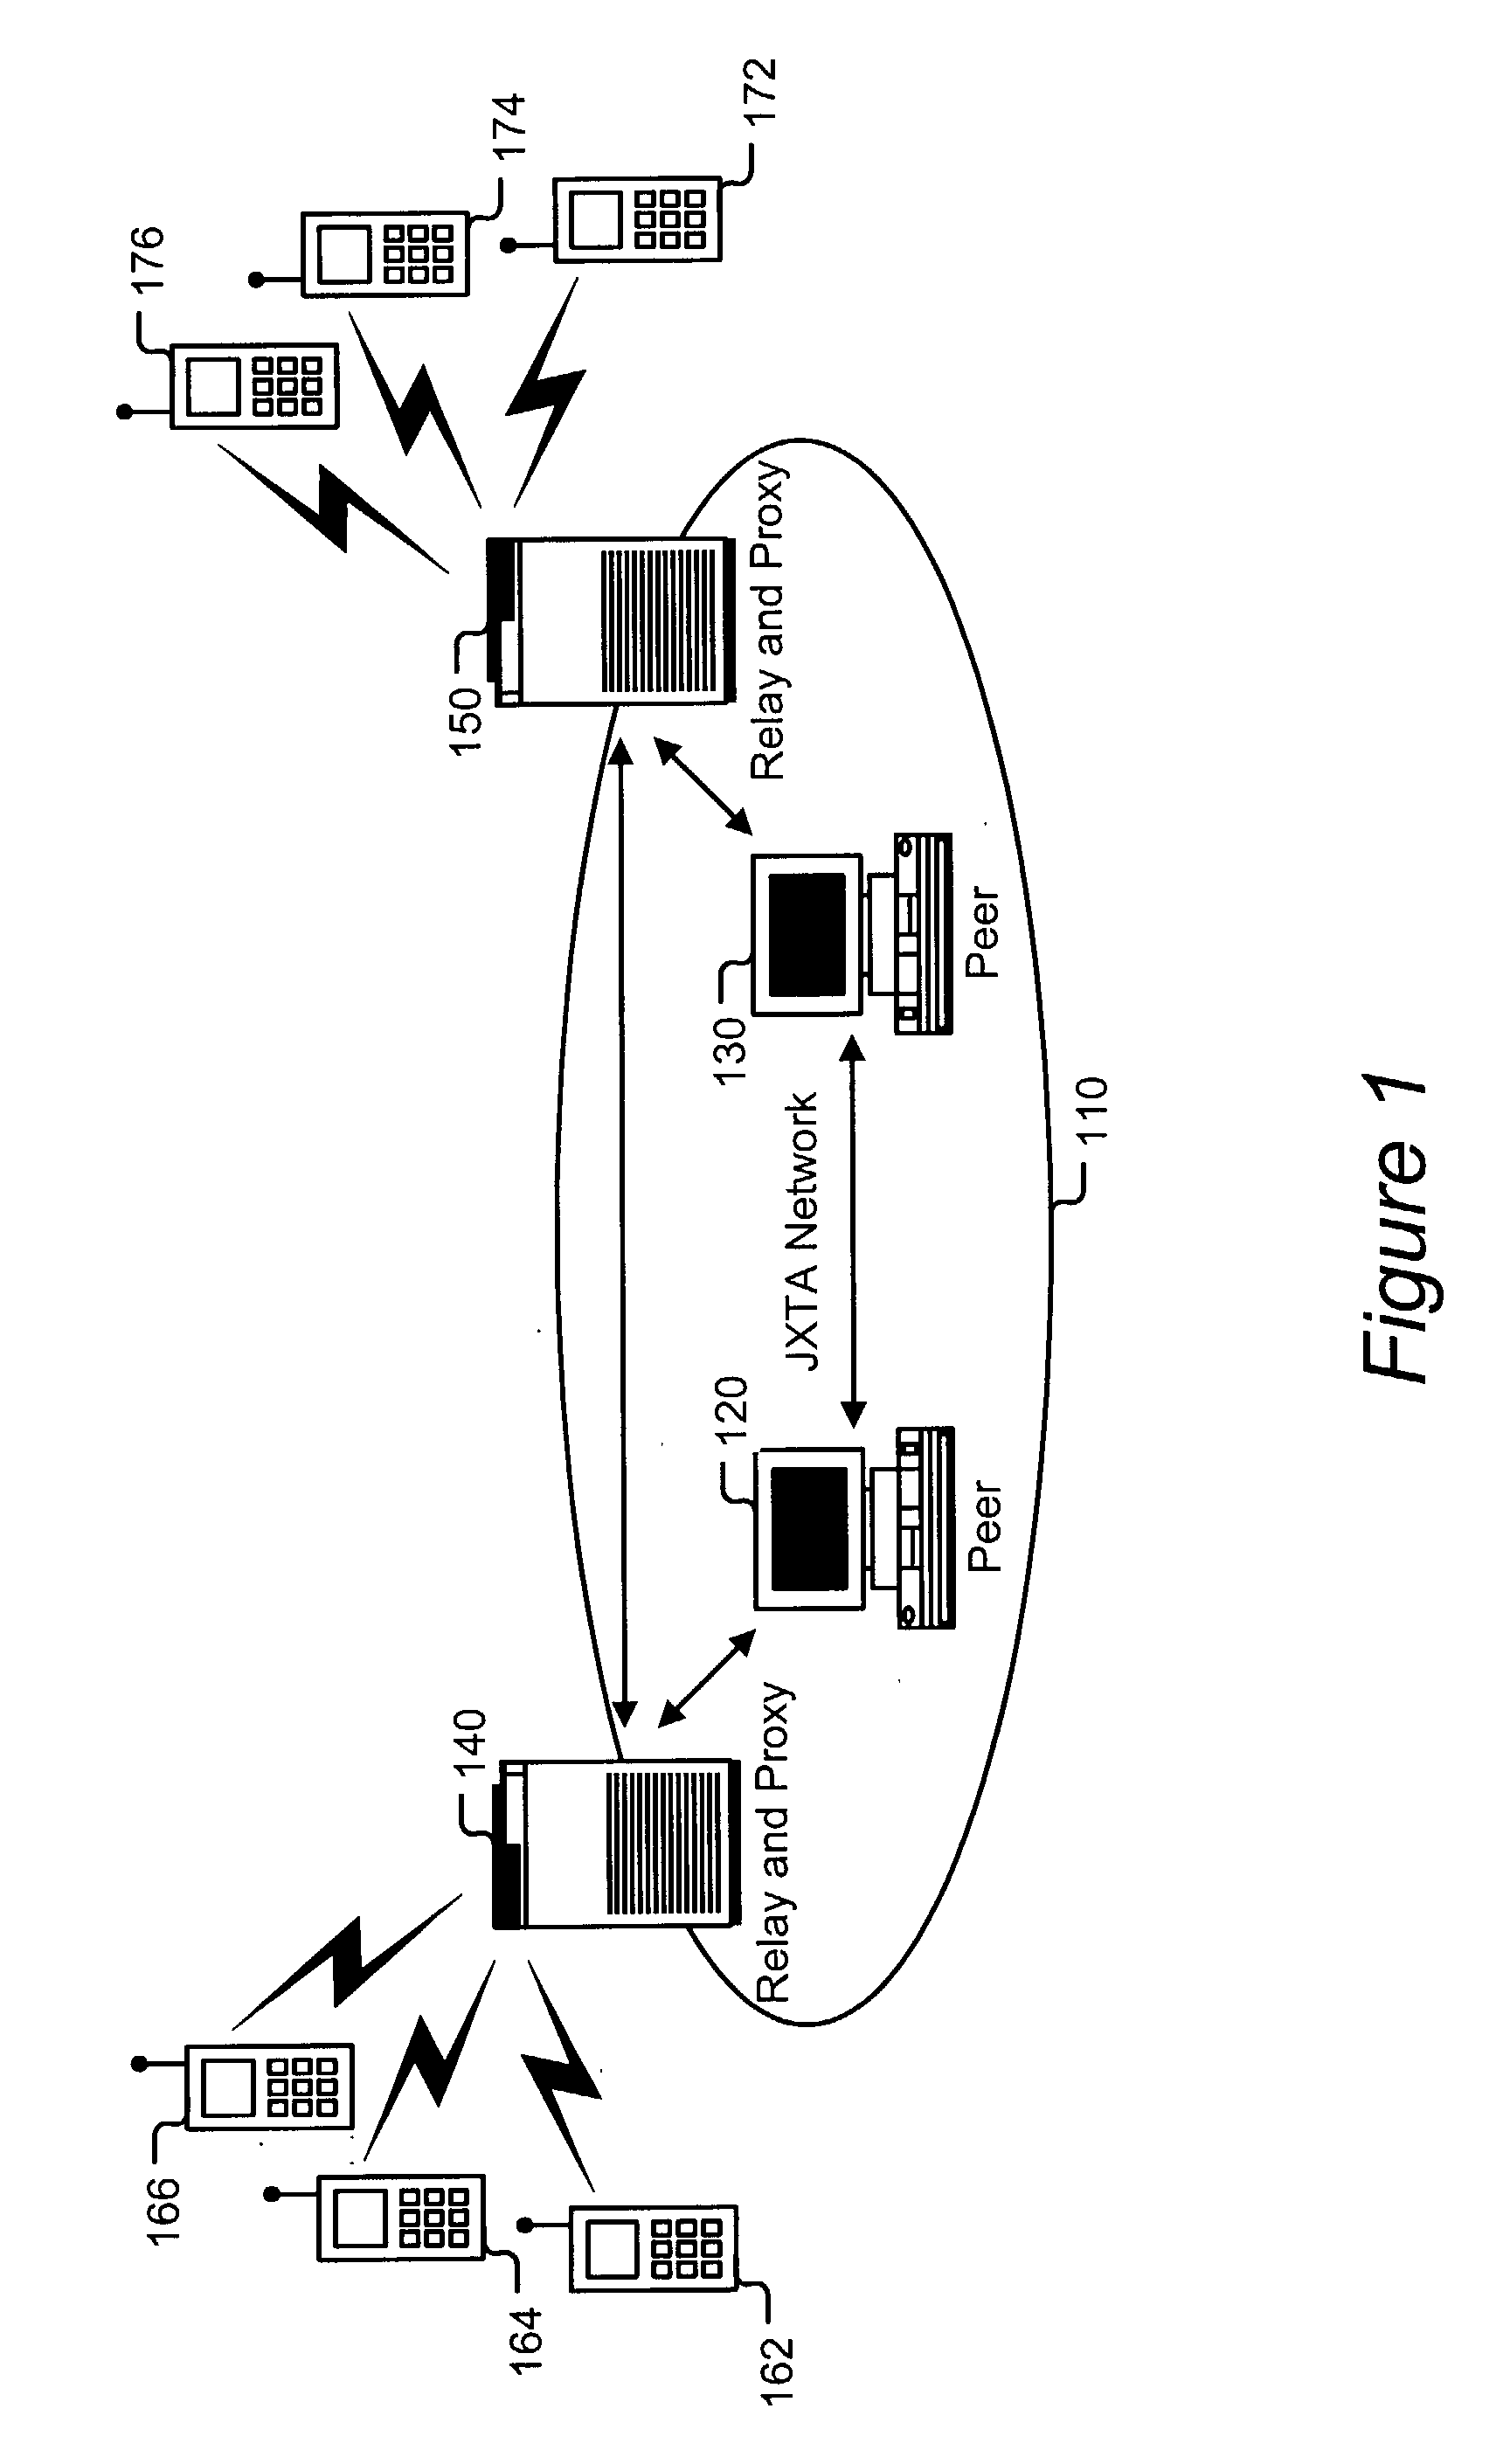 Method for communicating with a resource-constrained device on an edge of a network